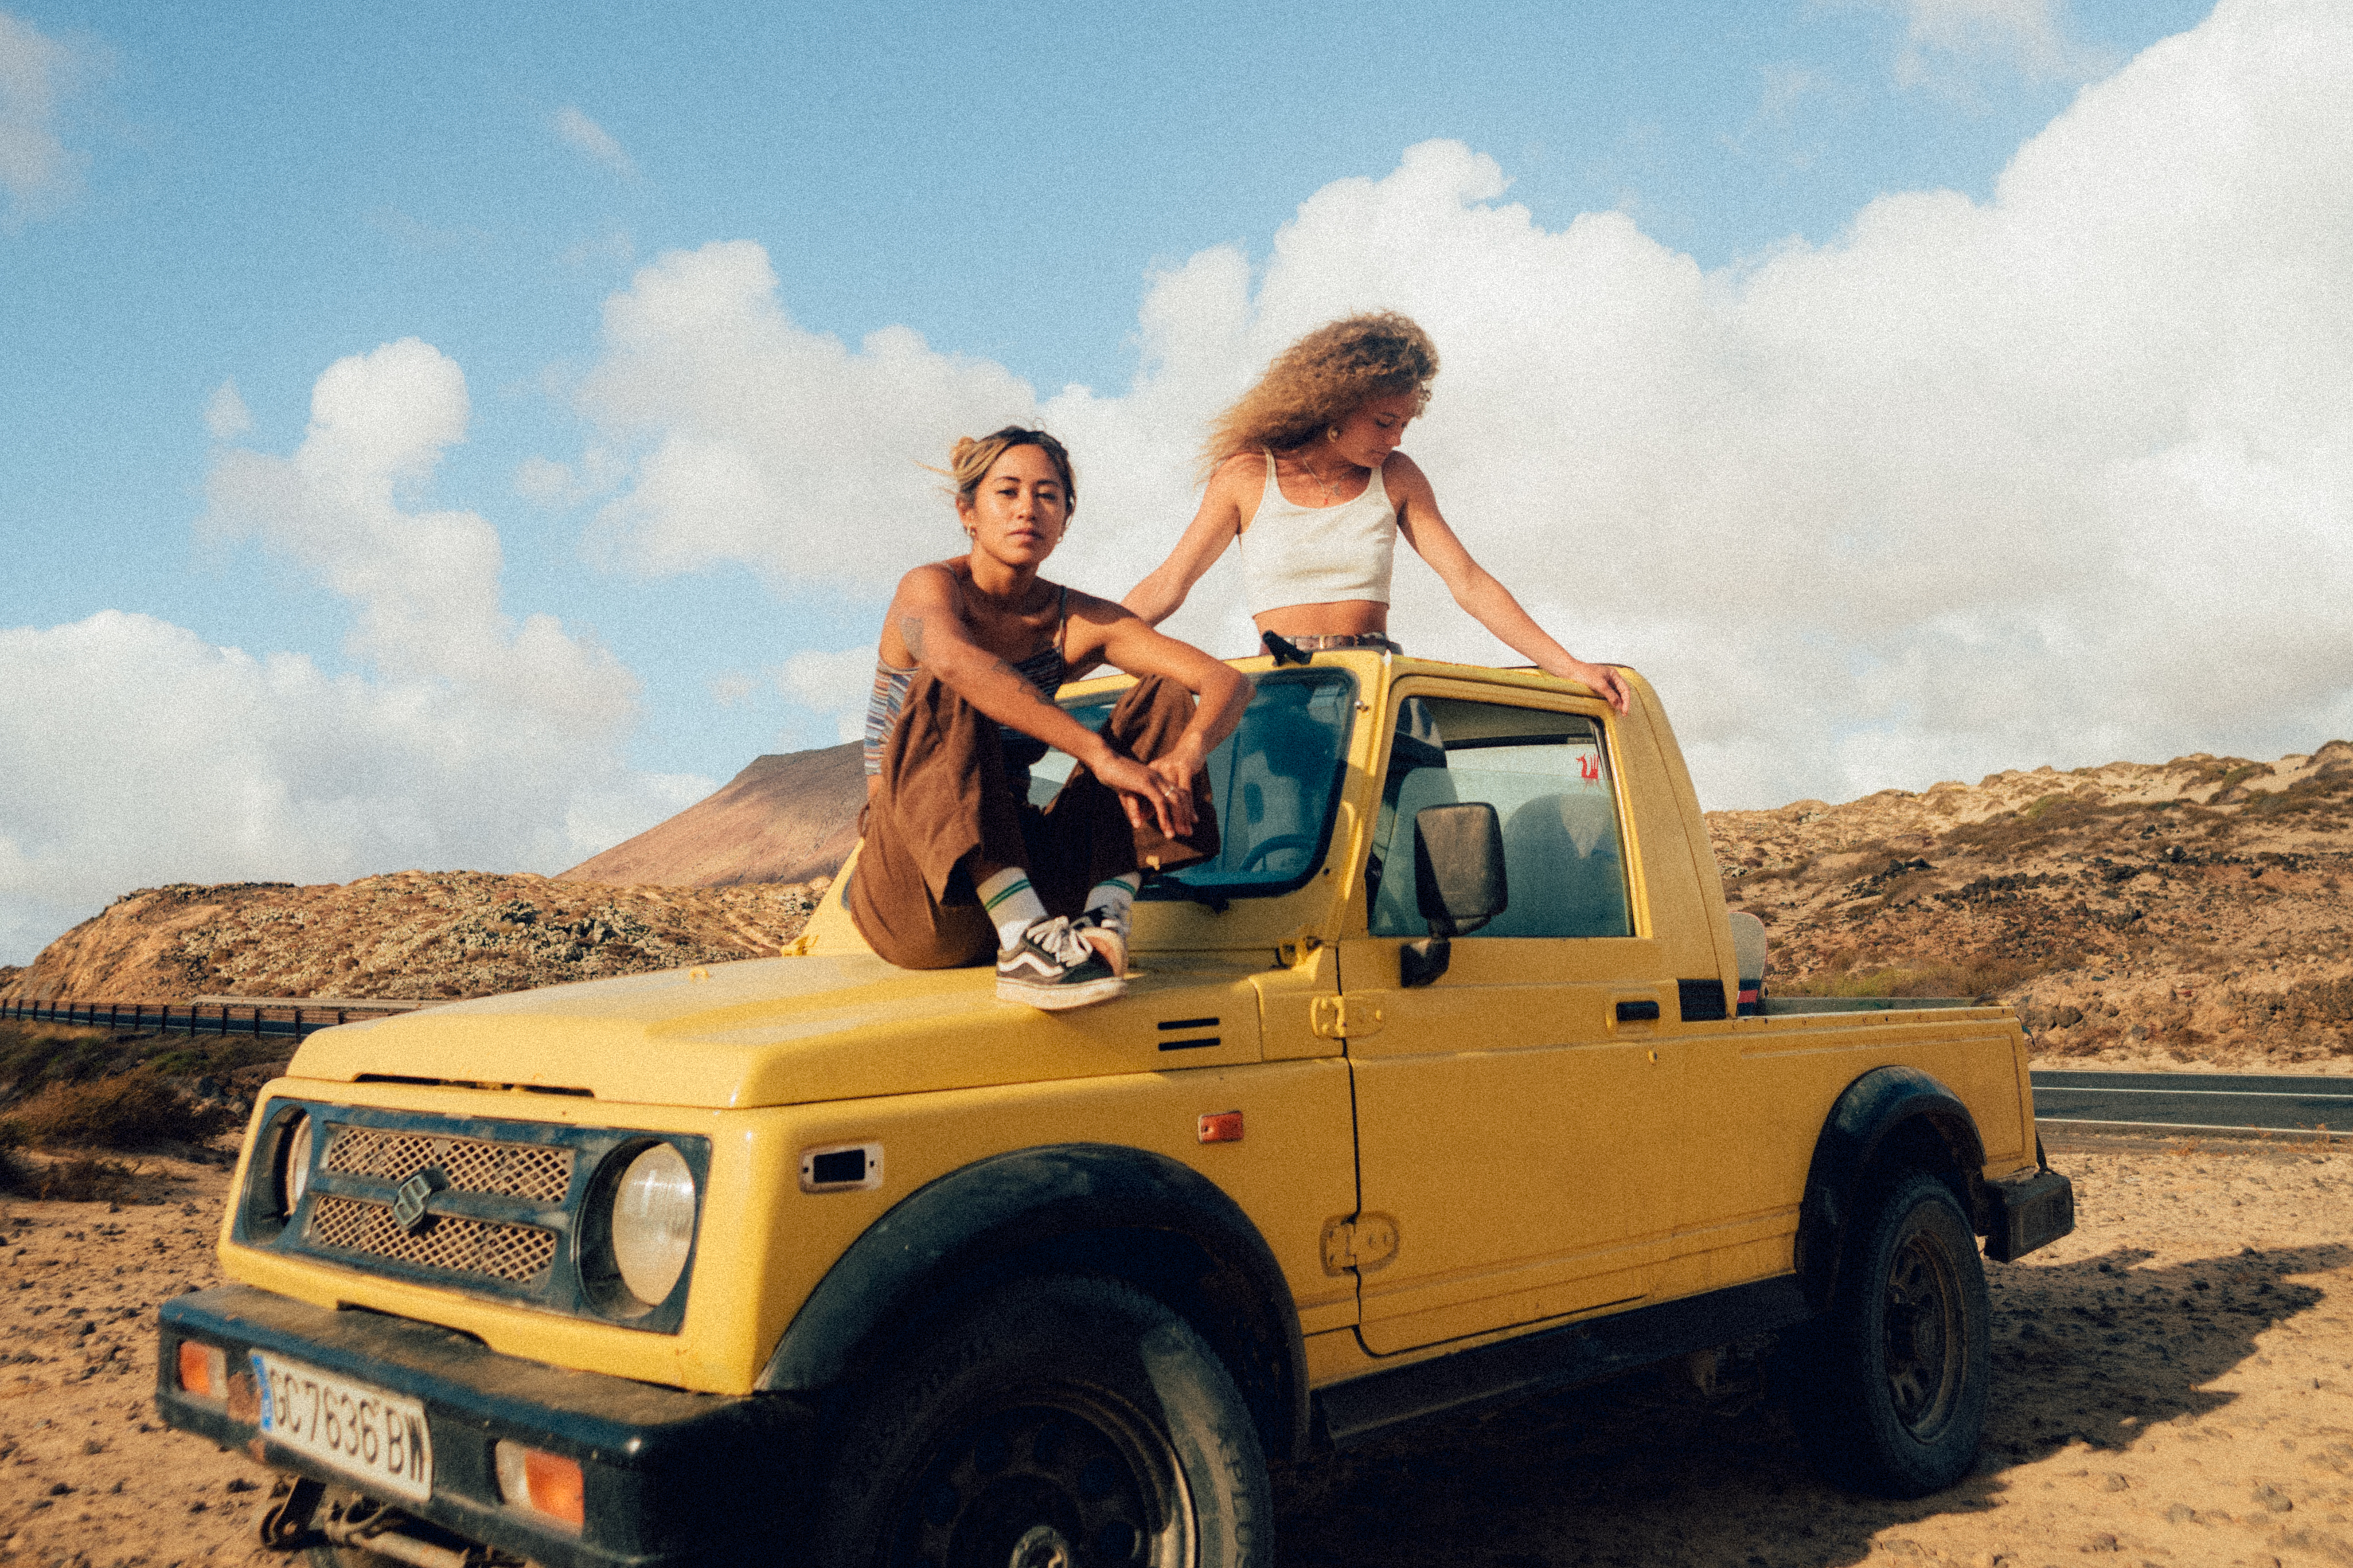 Two girl sitting on top of a yellow car